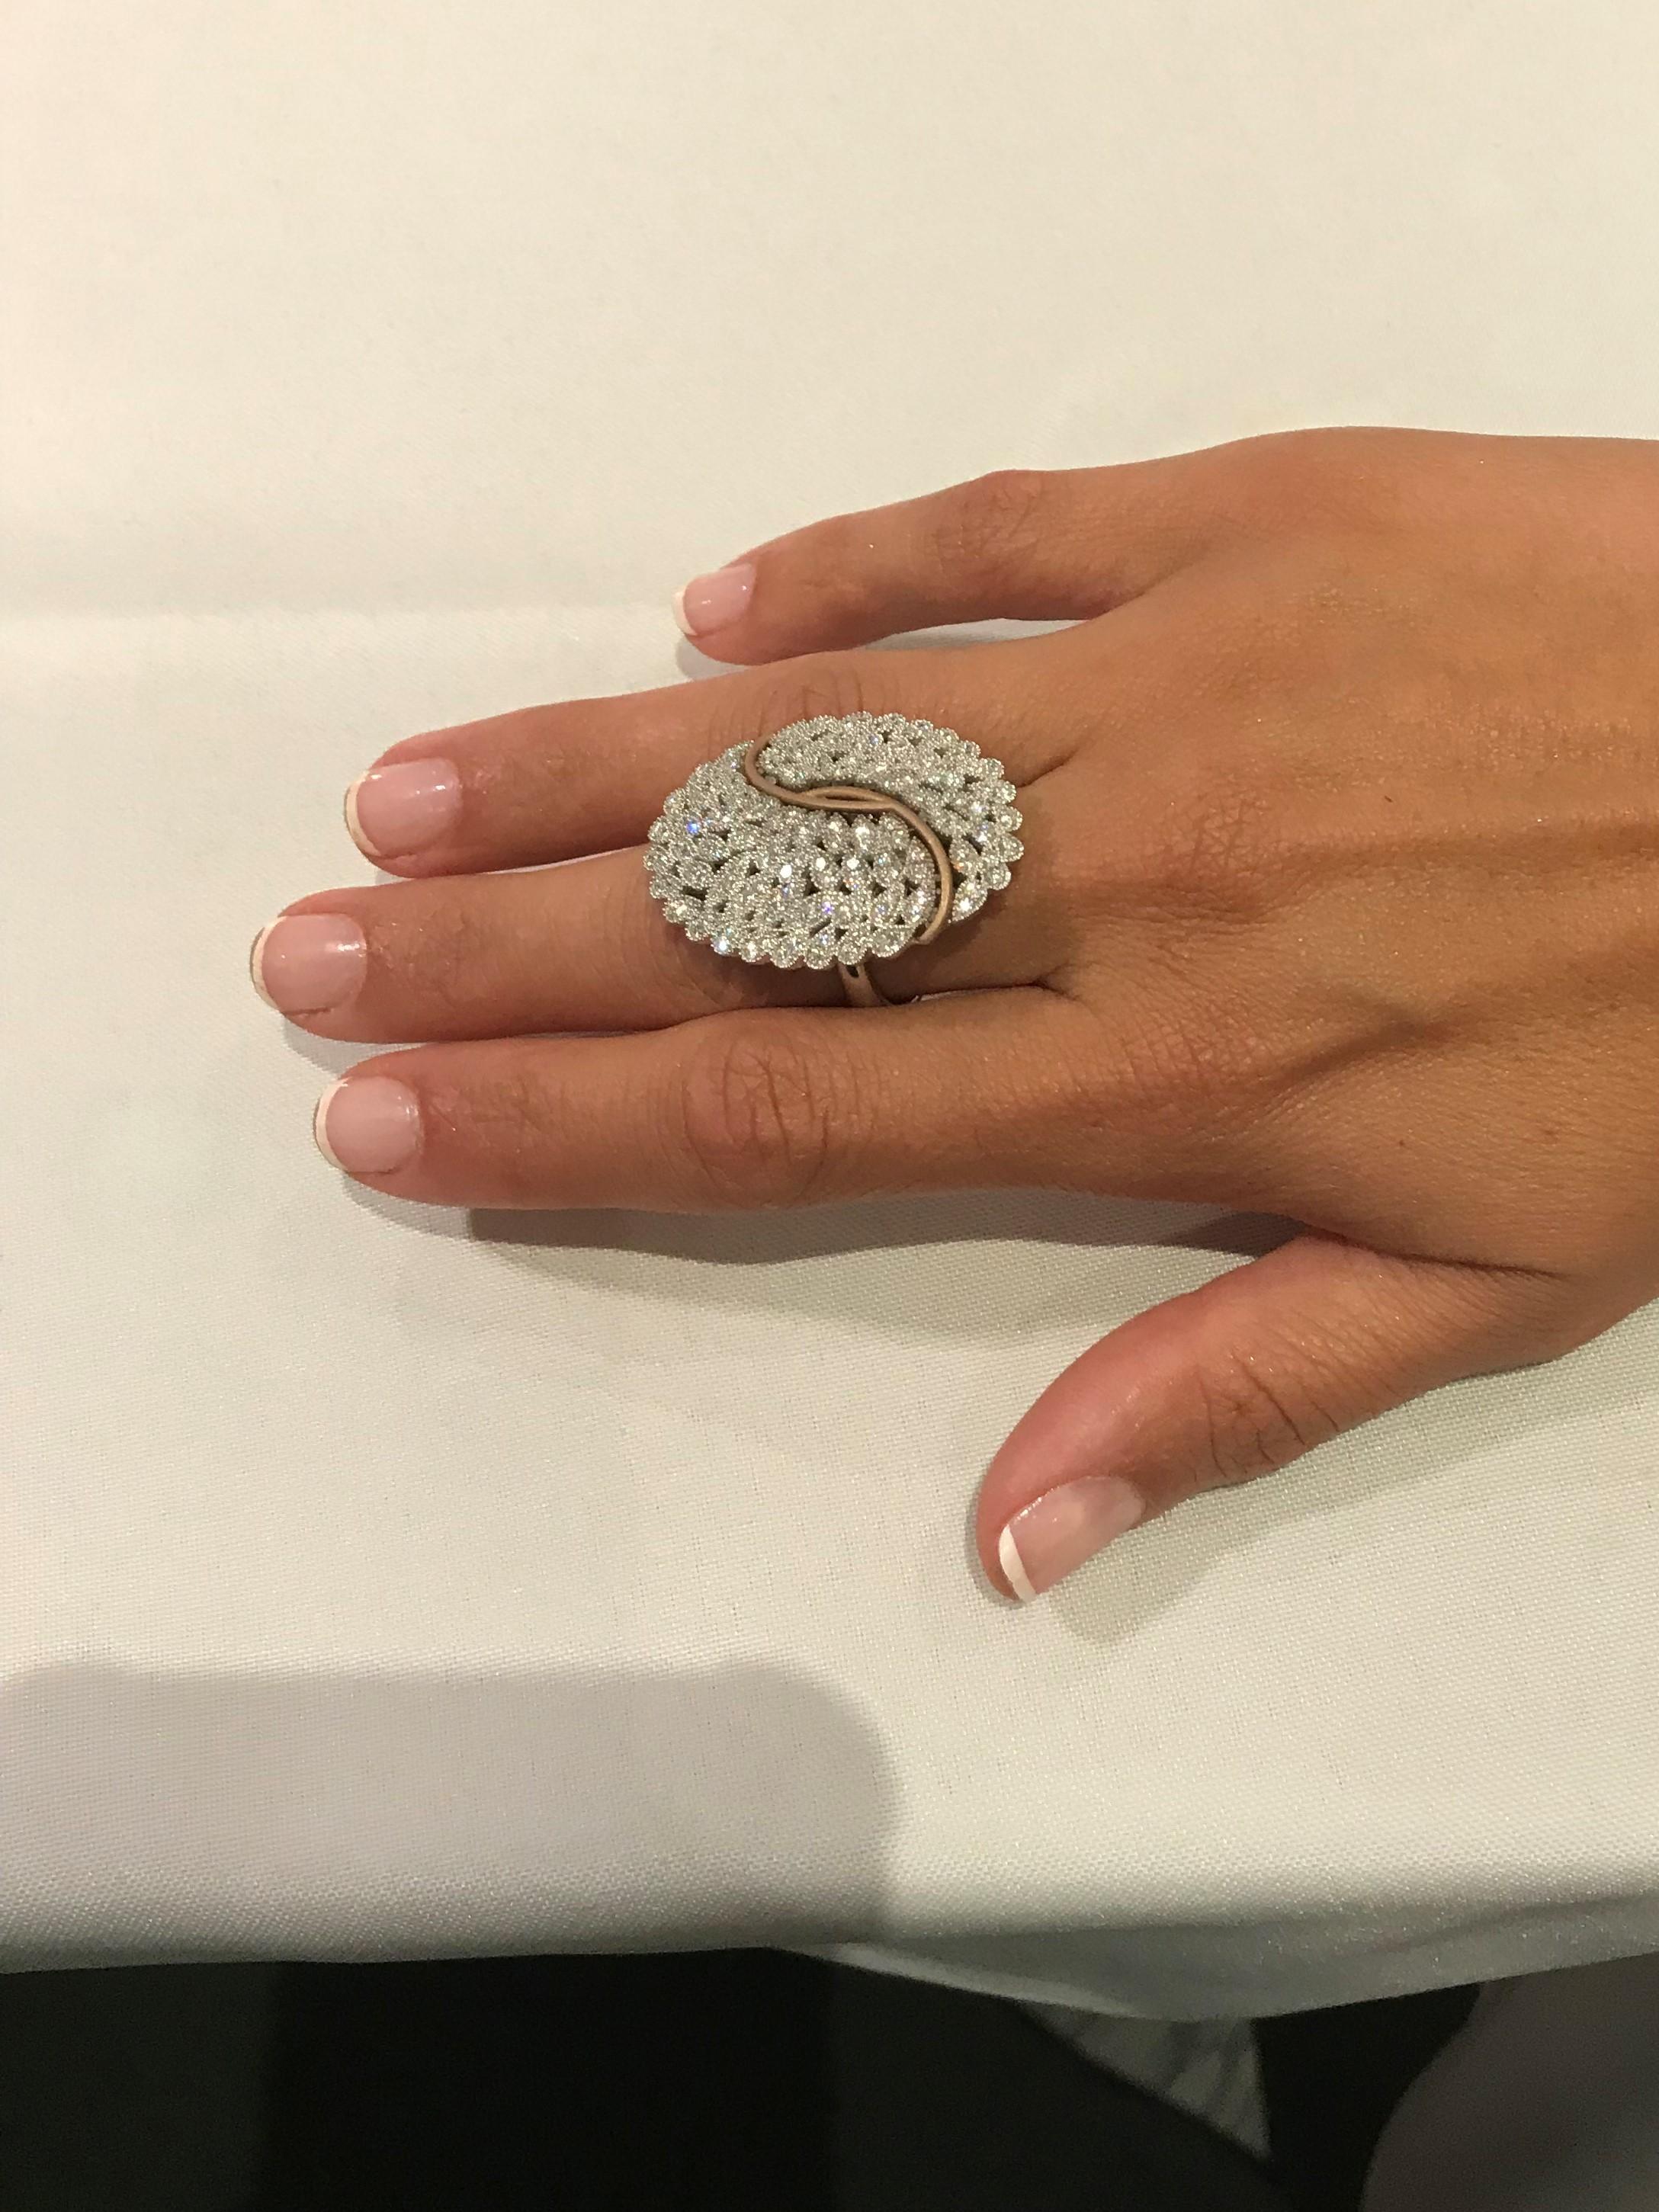 One of a Kind Italian designer cocktail Fashion Ring.
You want that special ring that no one has? Unique, made by our Italian designer features 2.02 Cts of brilliant diamonds in G/H SI Quality